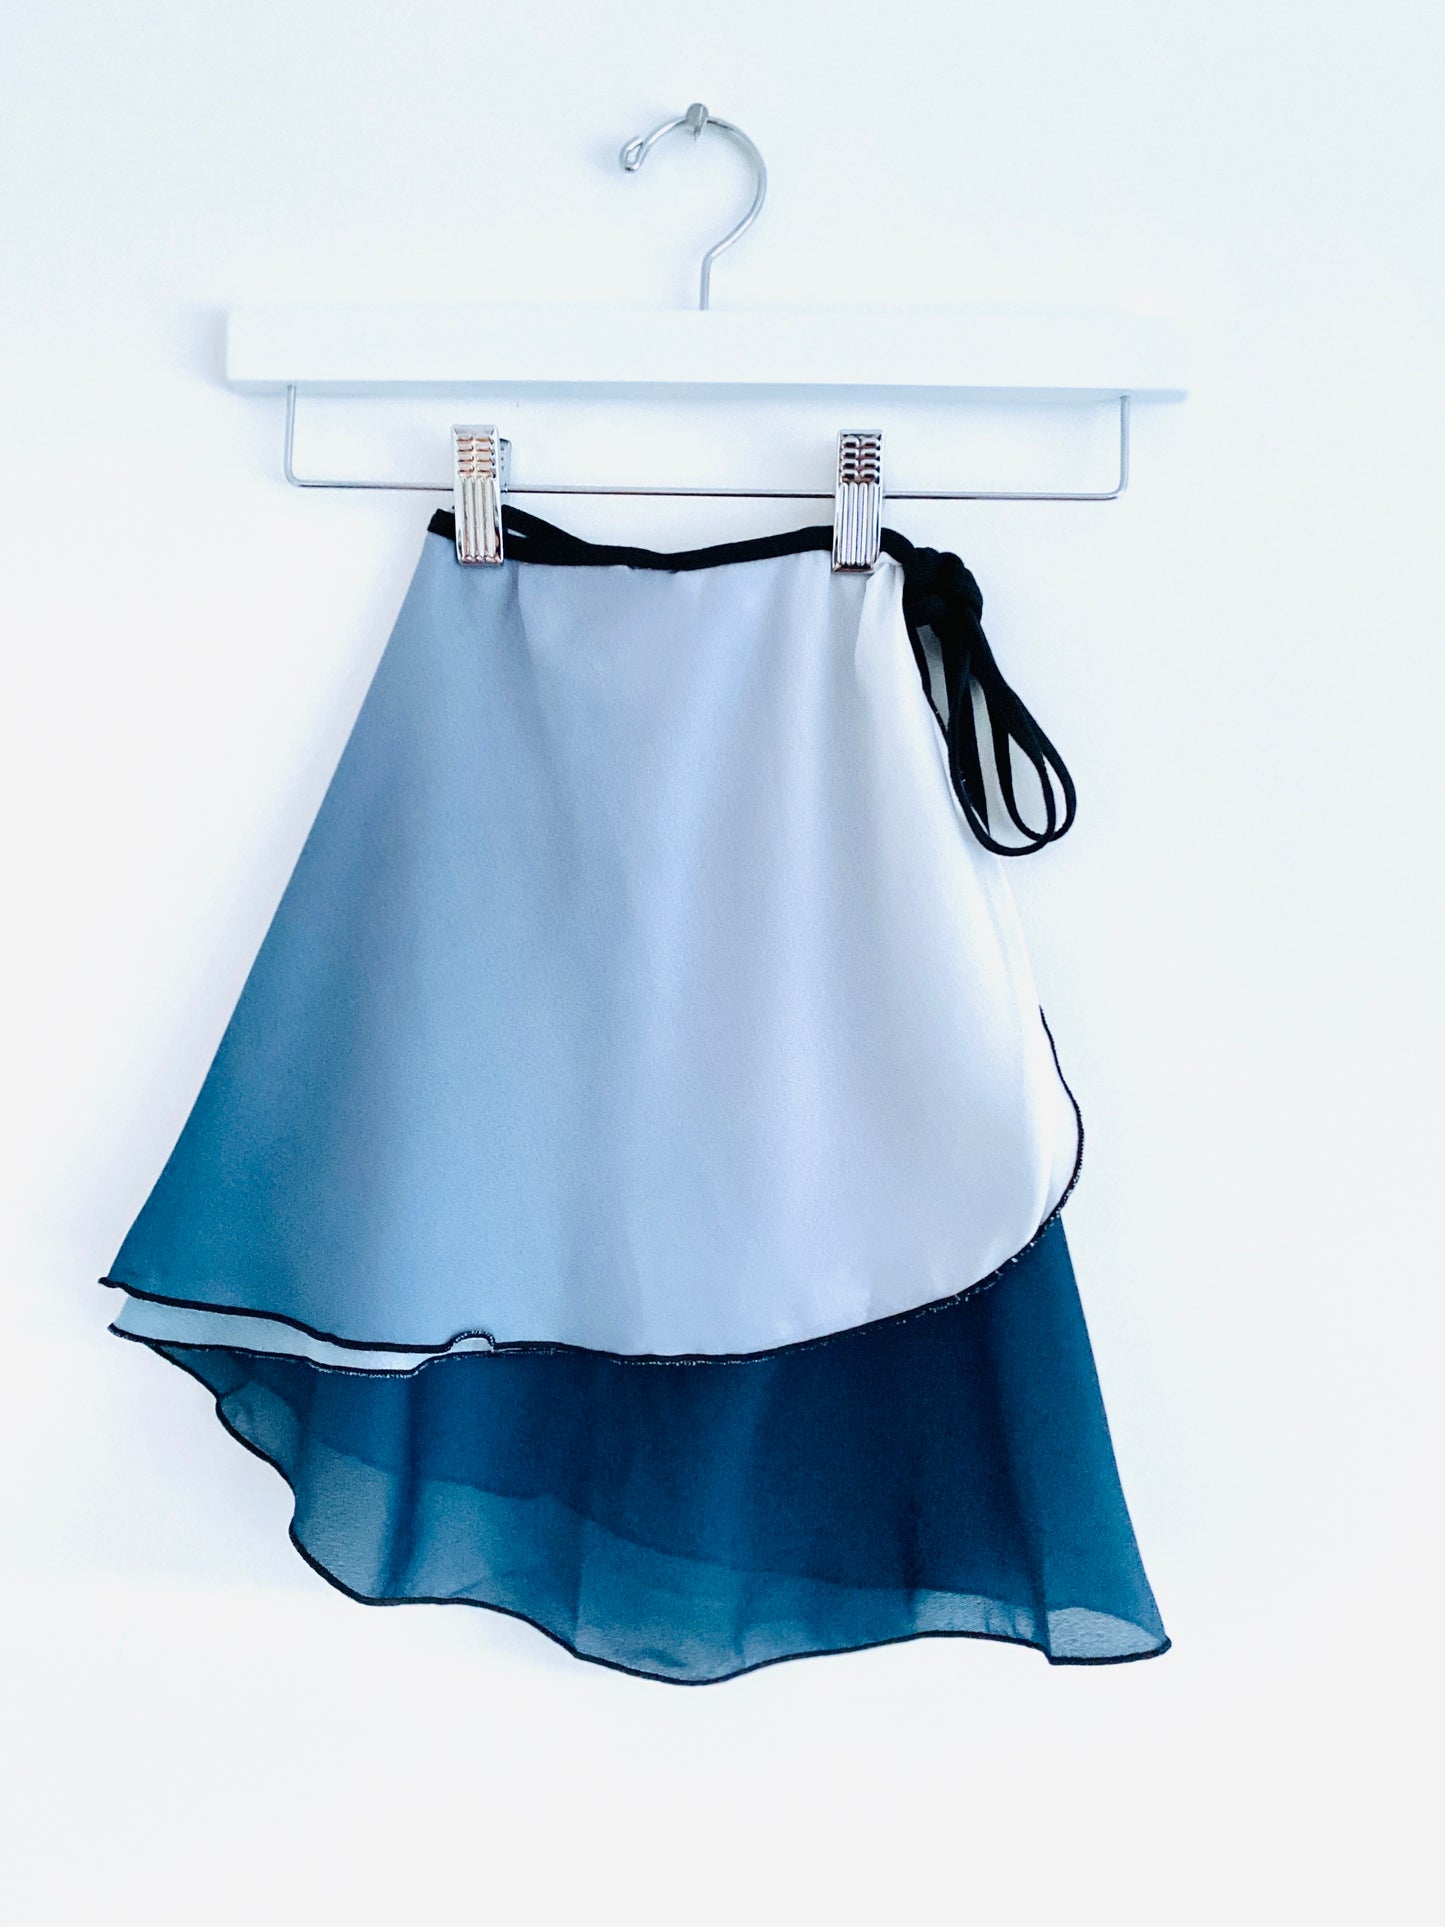 Ombre ballet wrap skirt in navy to white from The Collective Dancewear 